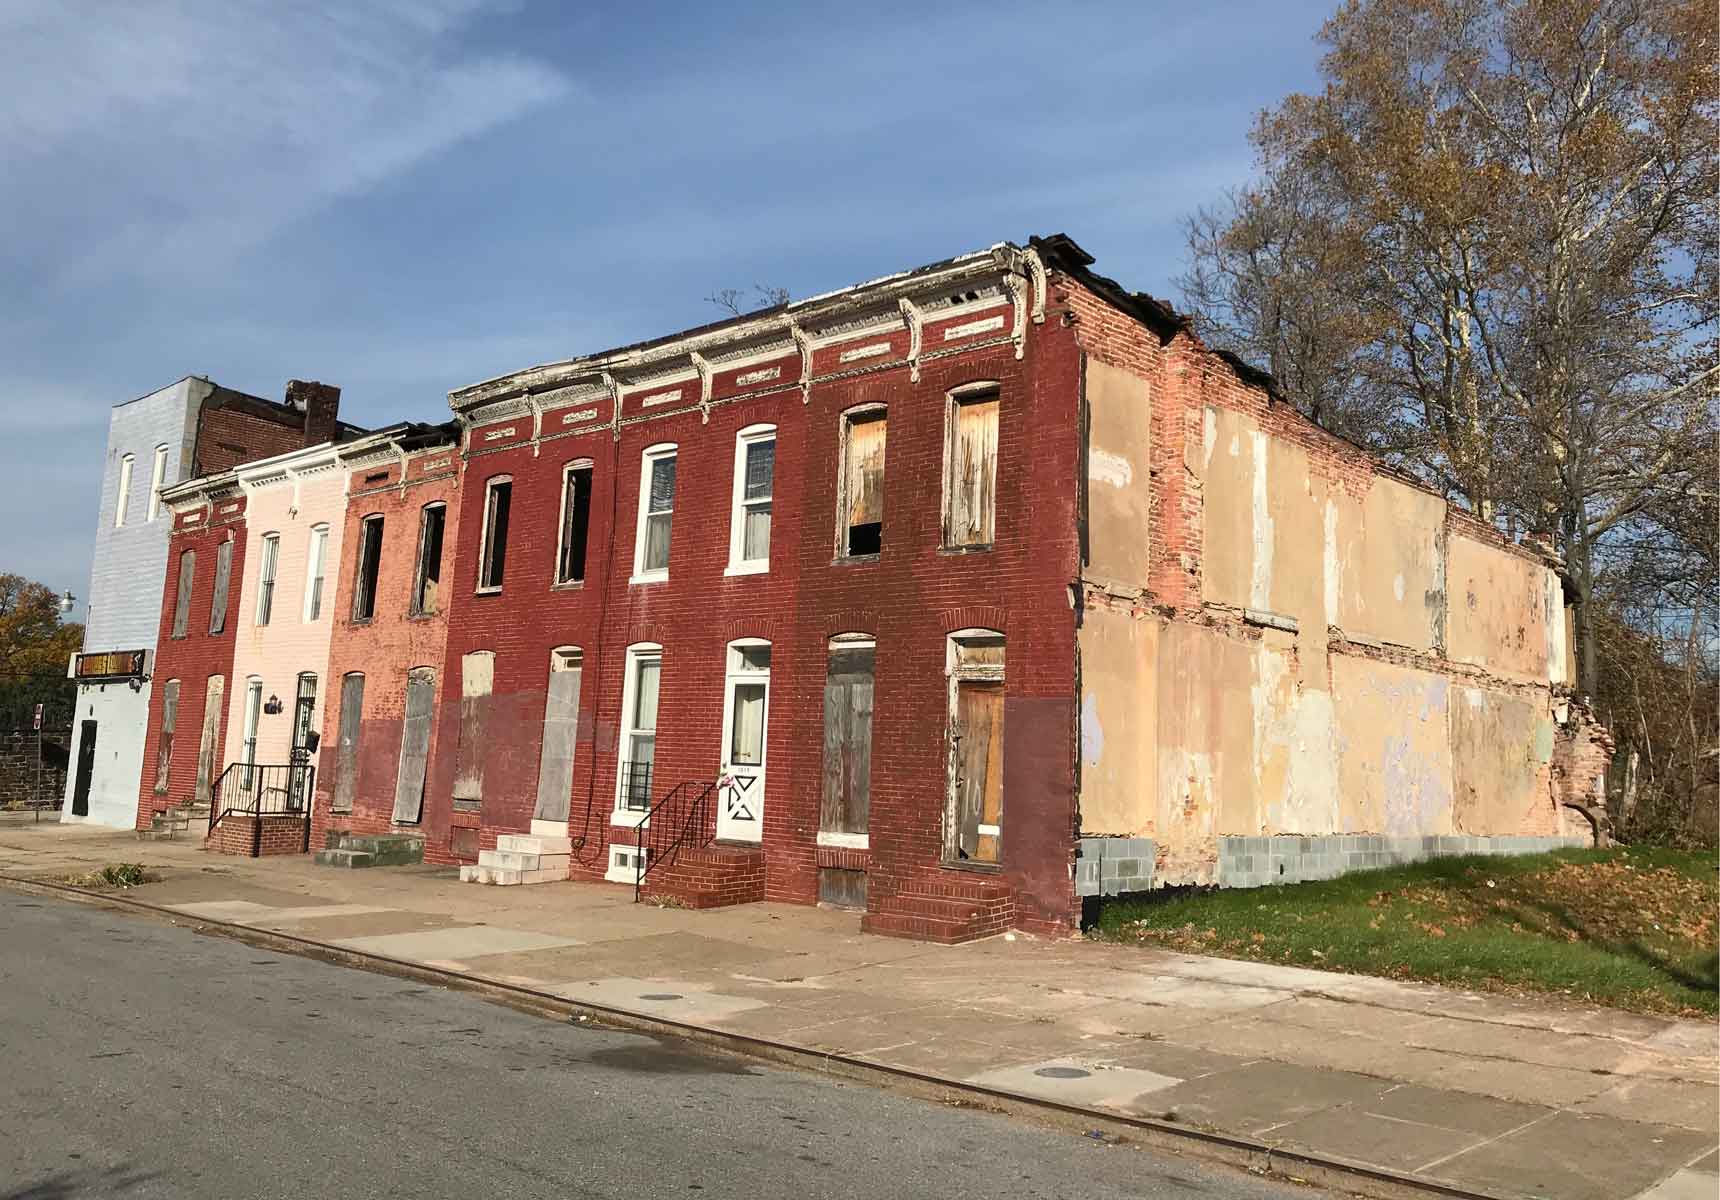 Vacant rowhouses